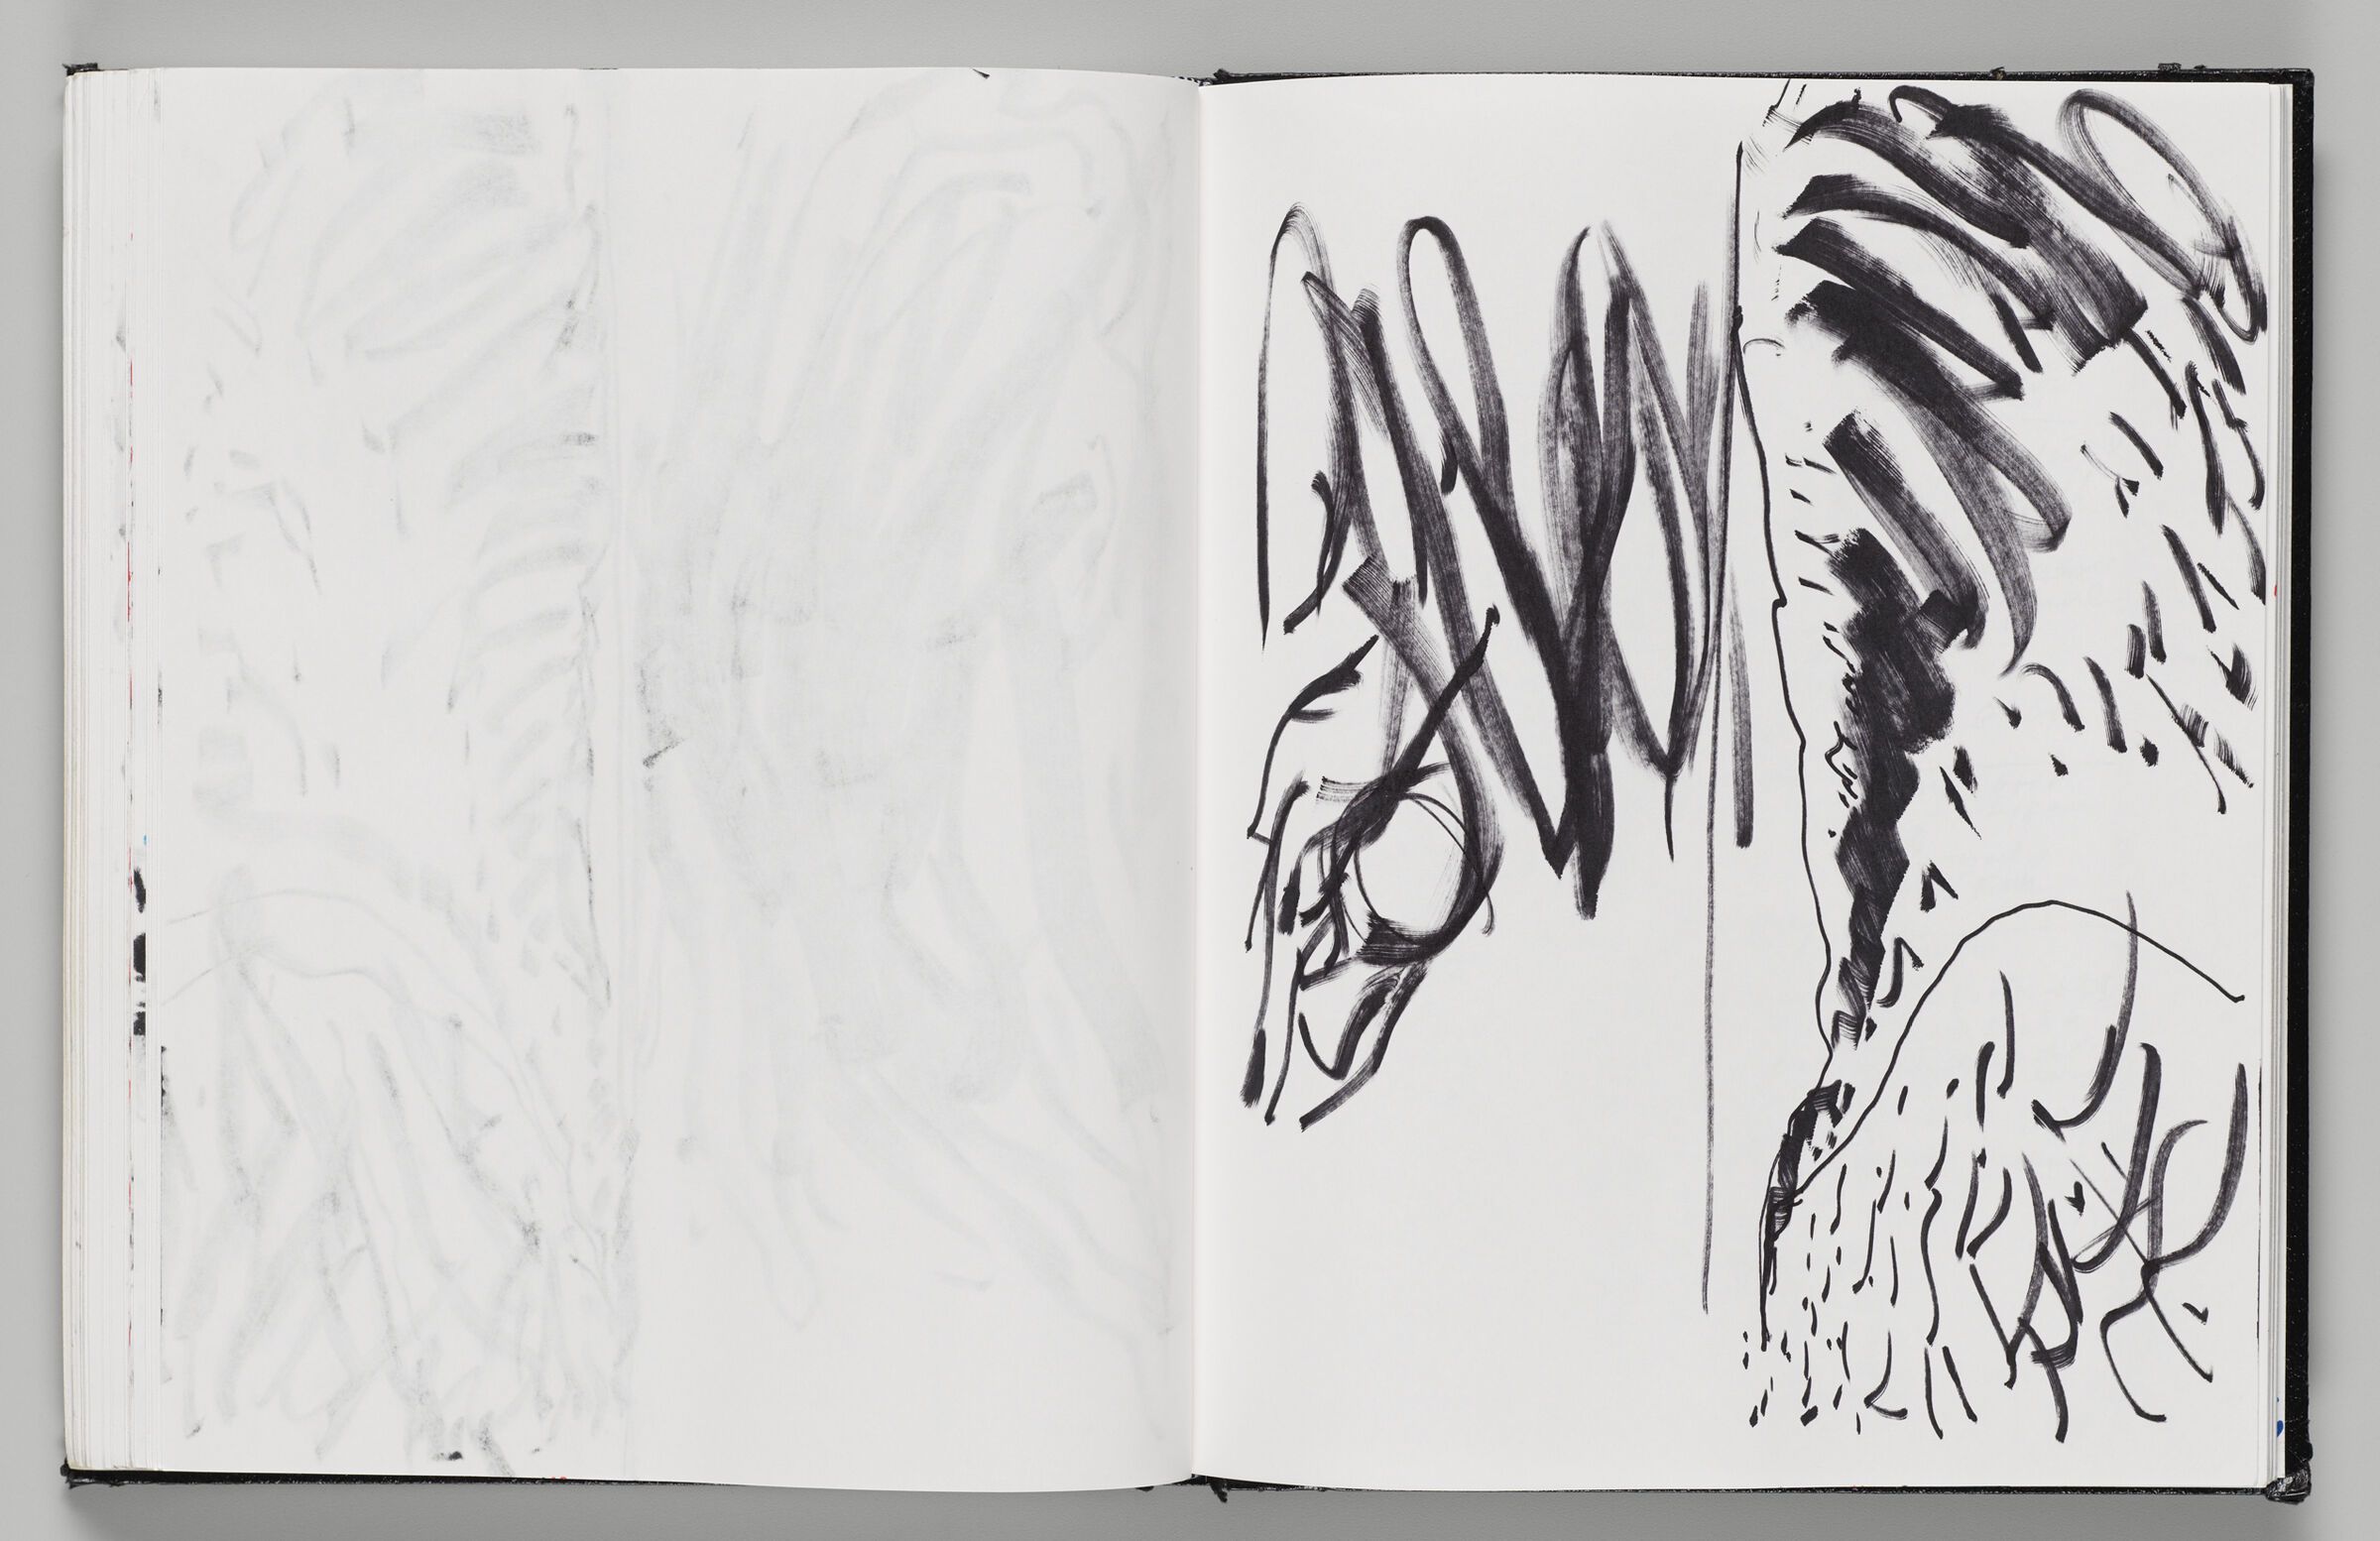 Untitled (Bleed-Through Of Previous Page, Left Page); Untitled (Nauset Beach, Right Page)
